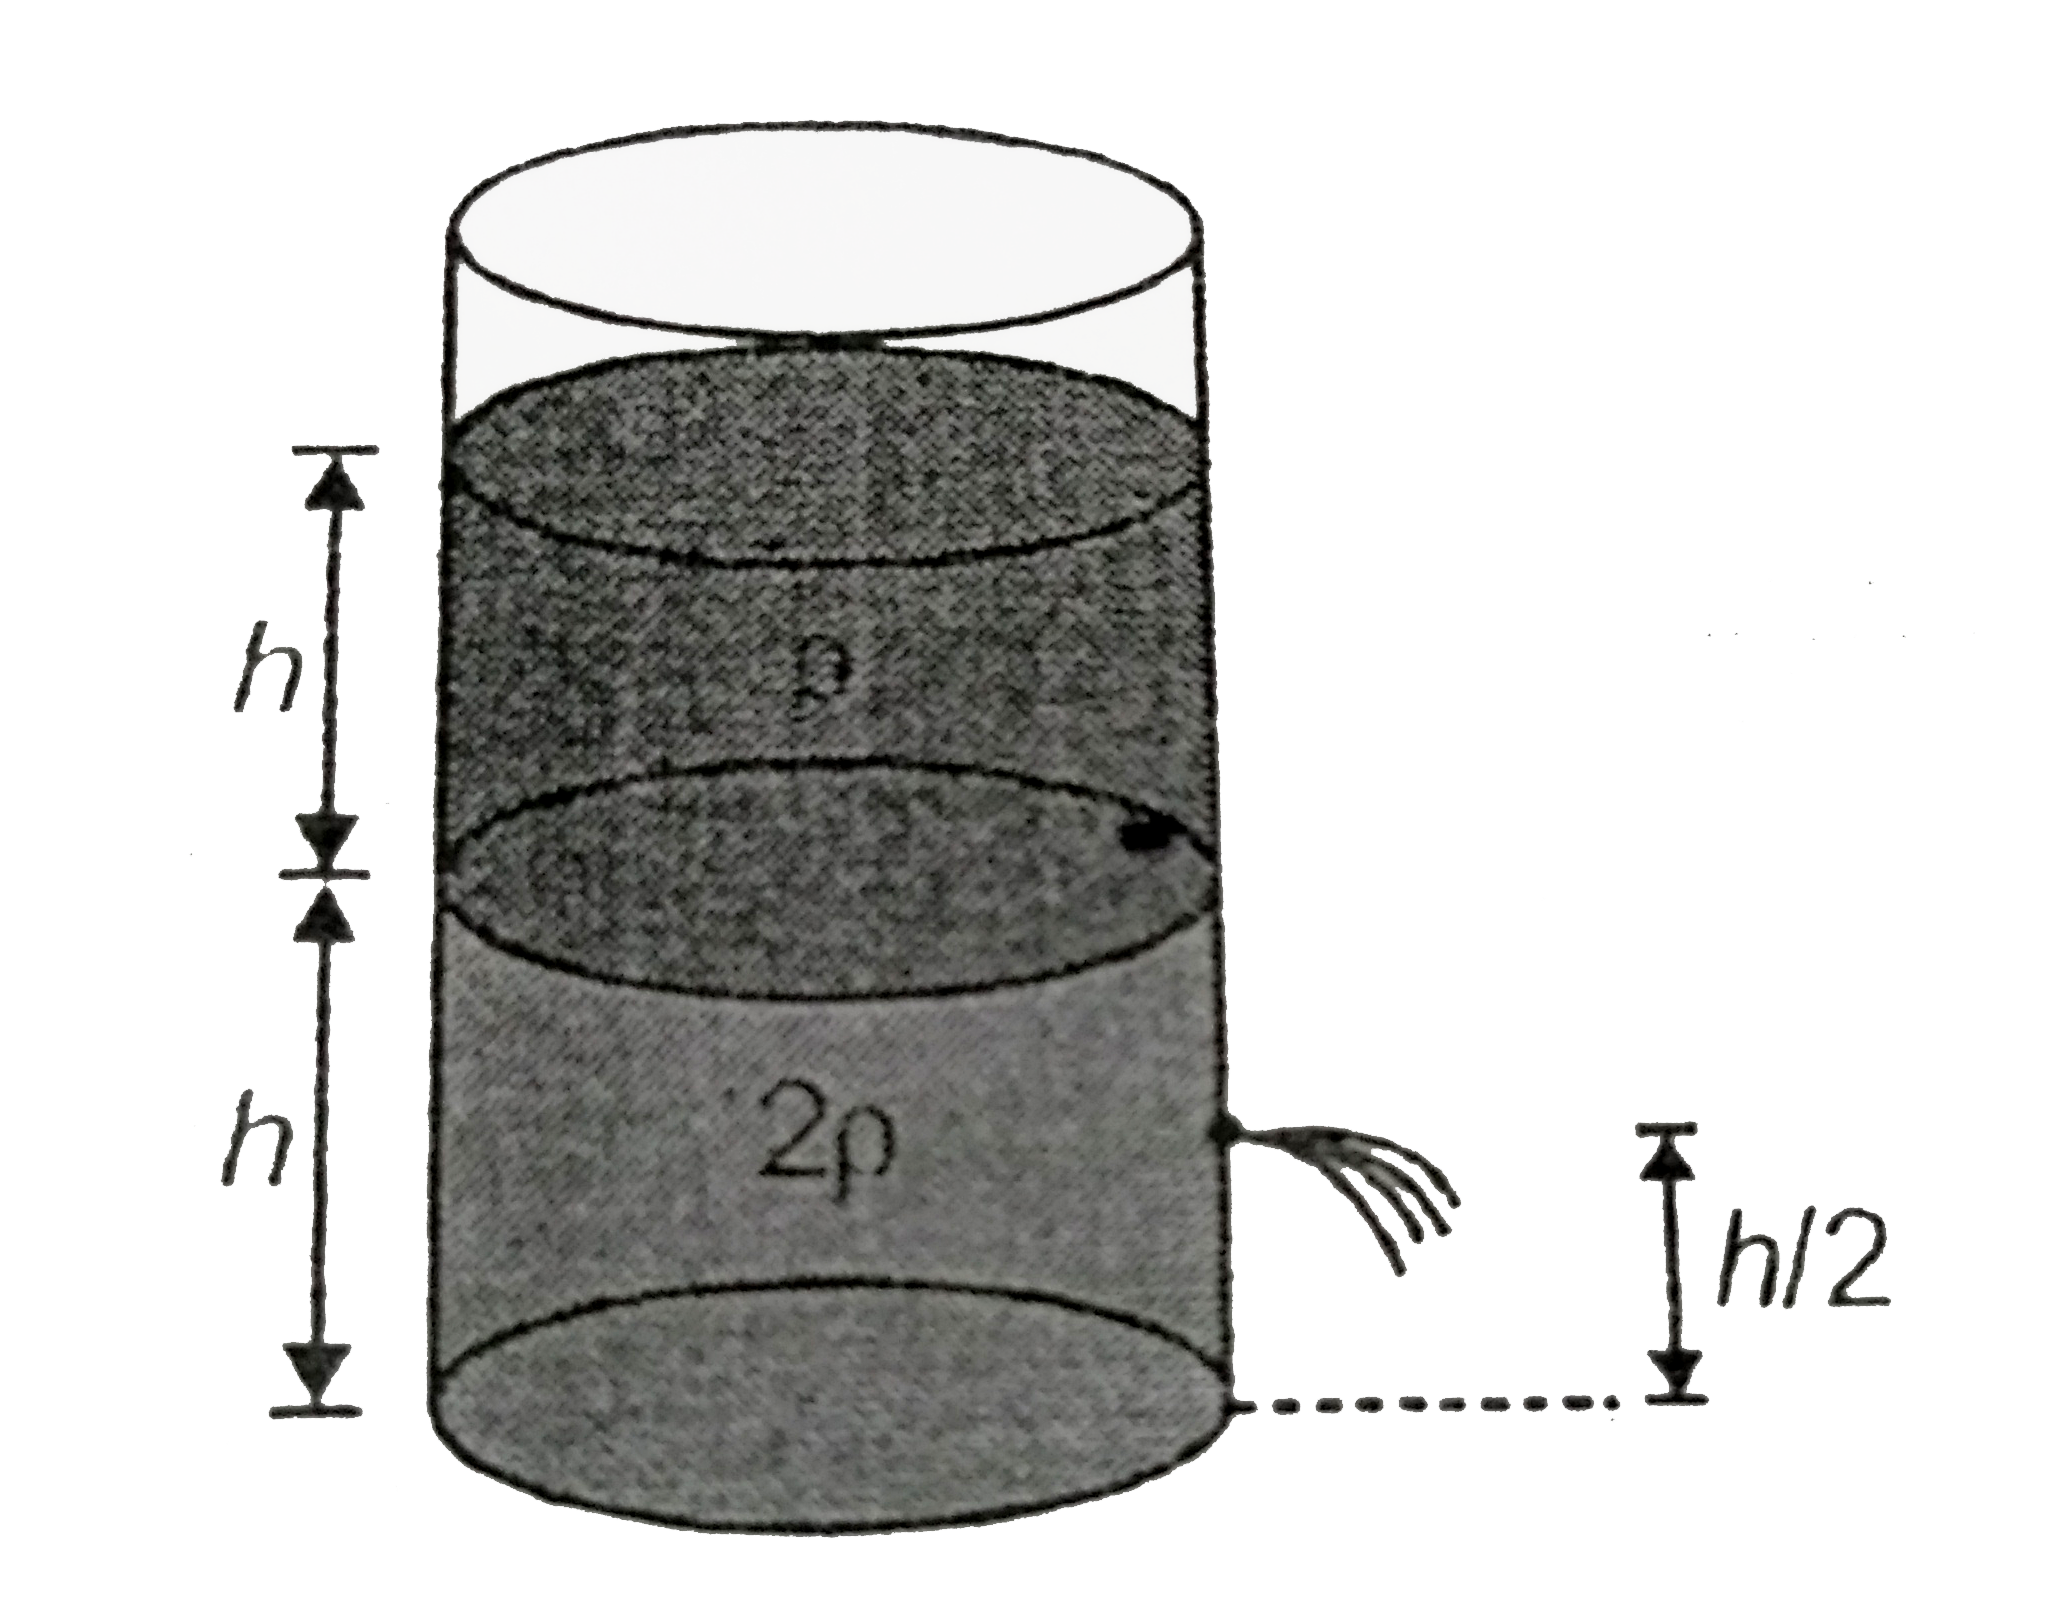 A vessel is filled with two different liquids of densities rho and 2 rho respectively as shown in the figure. The velocity of flow of liquid through a hole at height (h)/(2) from bottom is